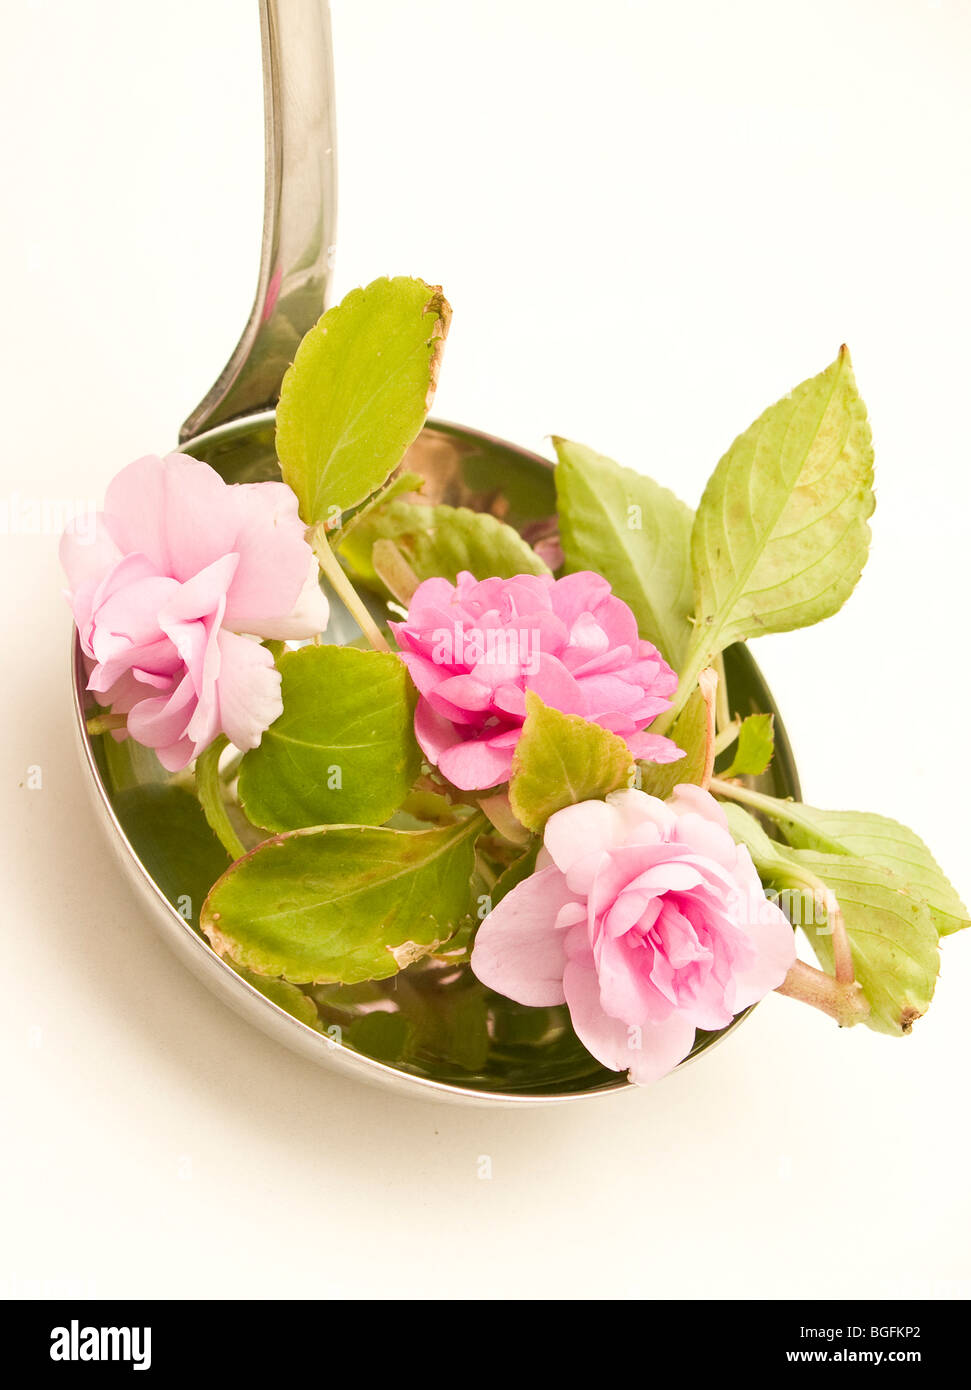 Ladle soup with flowers Stock Photo